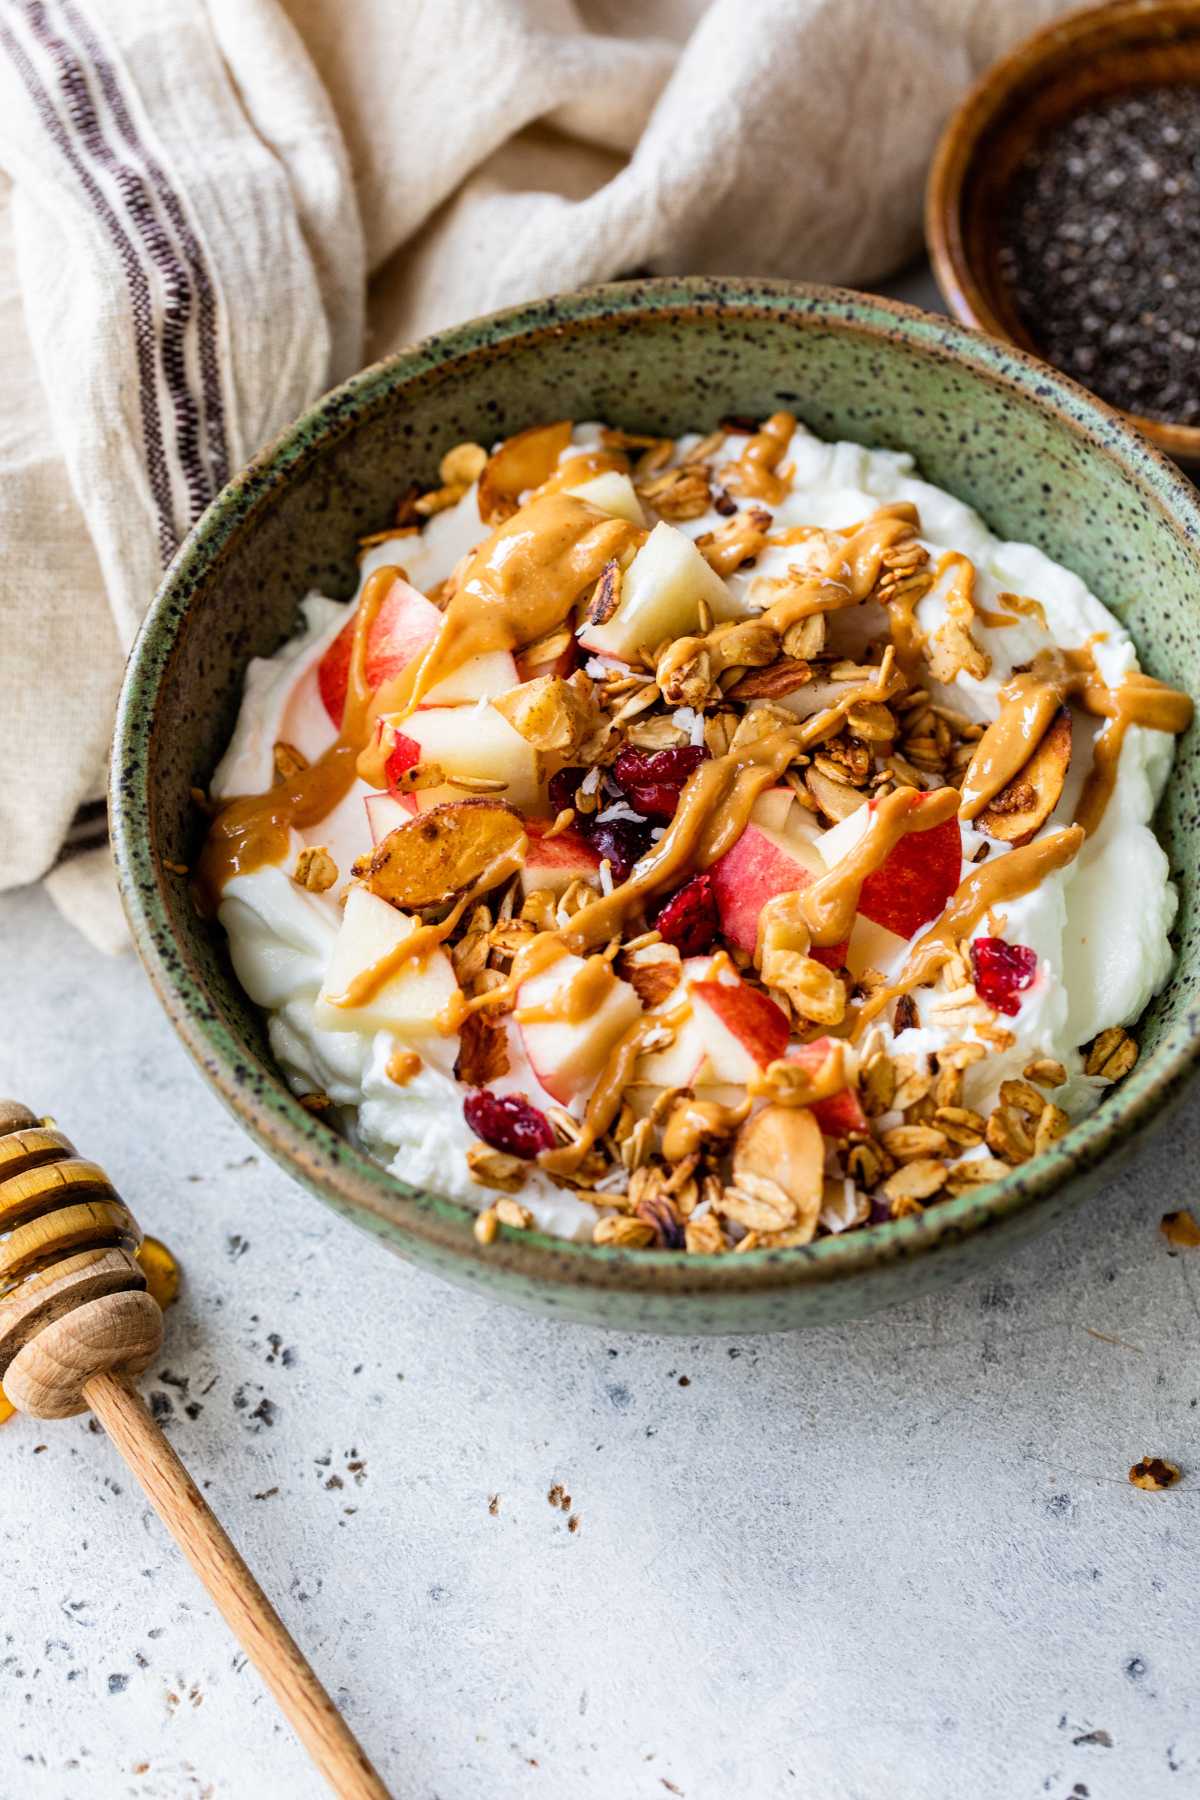 Yogurt topped with chopped apple, granola, peanut butter and honey.